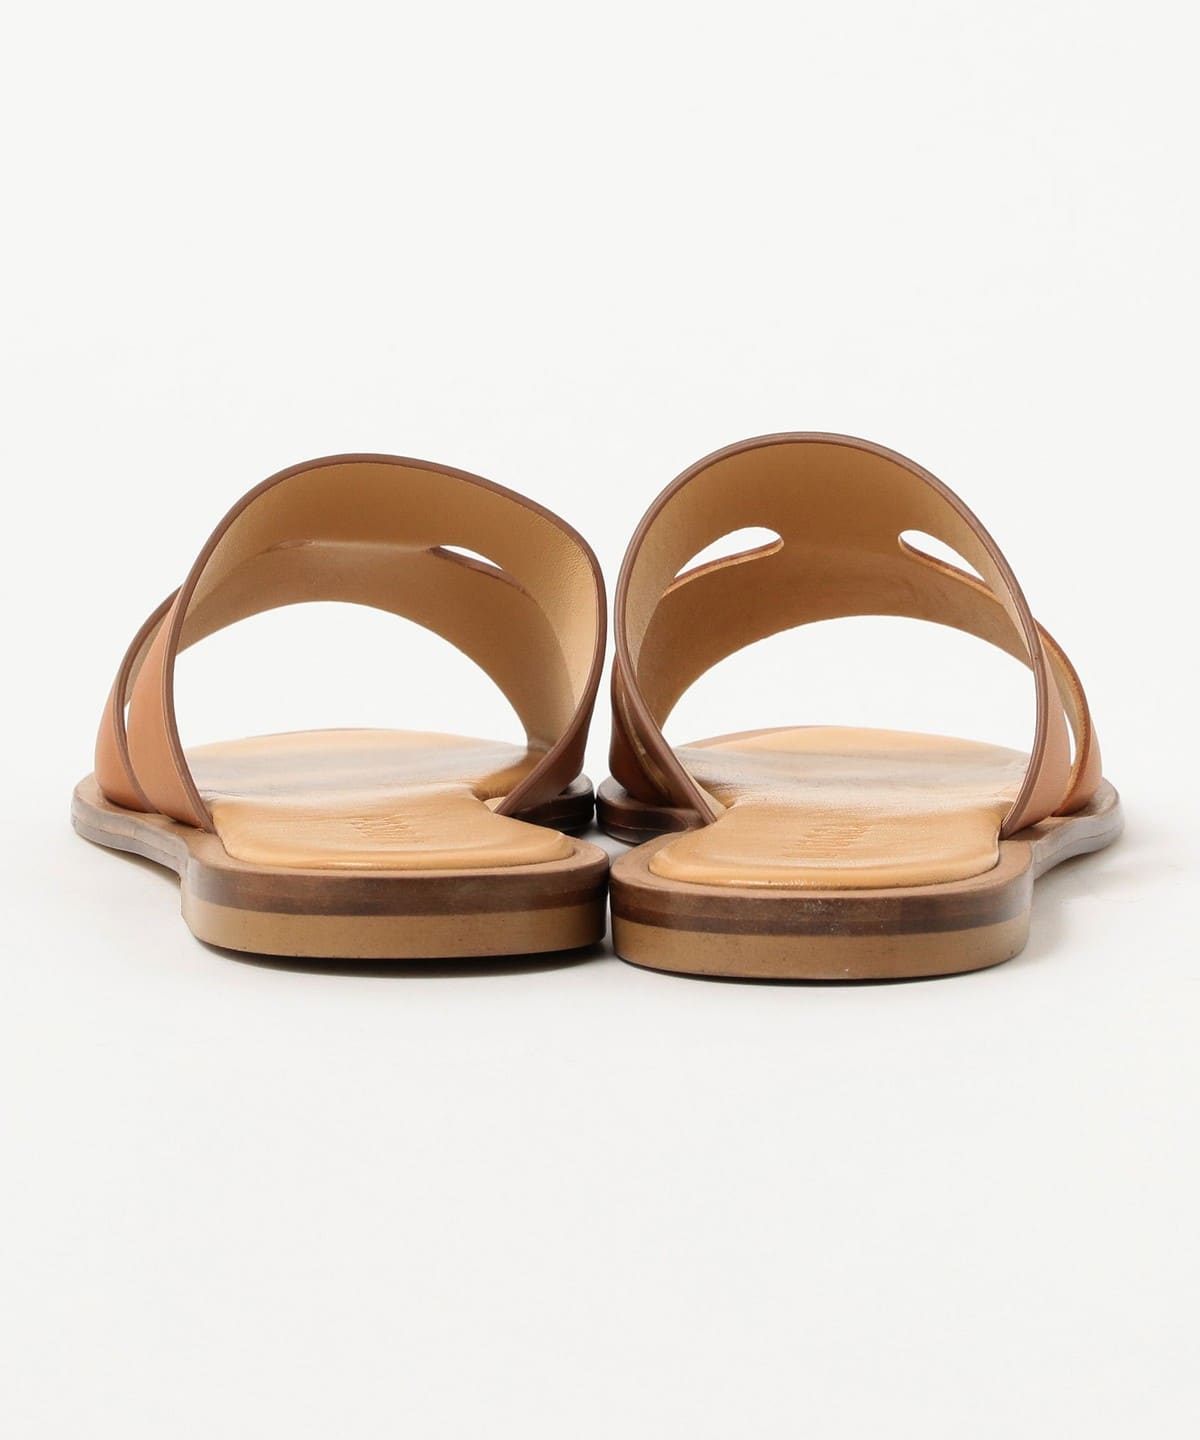 BEAMS F L/UCCA × BEAMS F BEAMS Special order leather sandals 